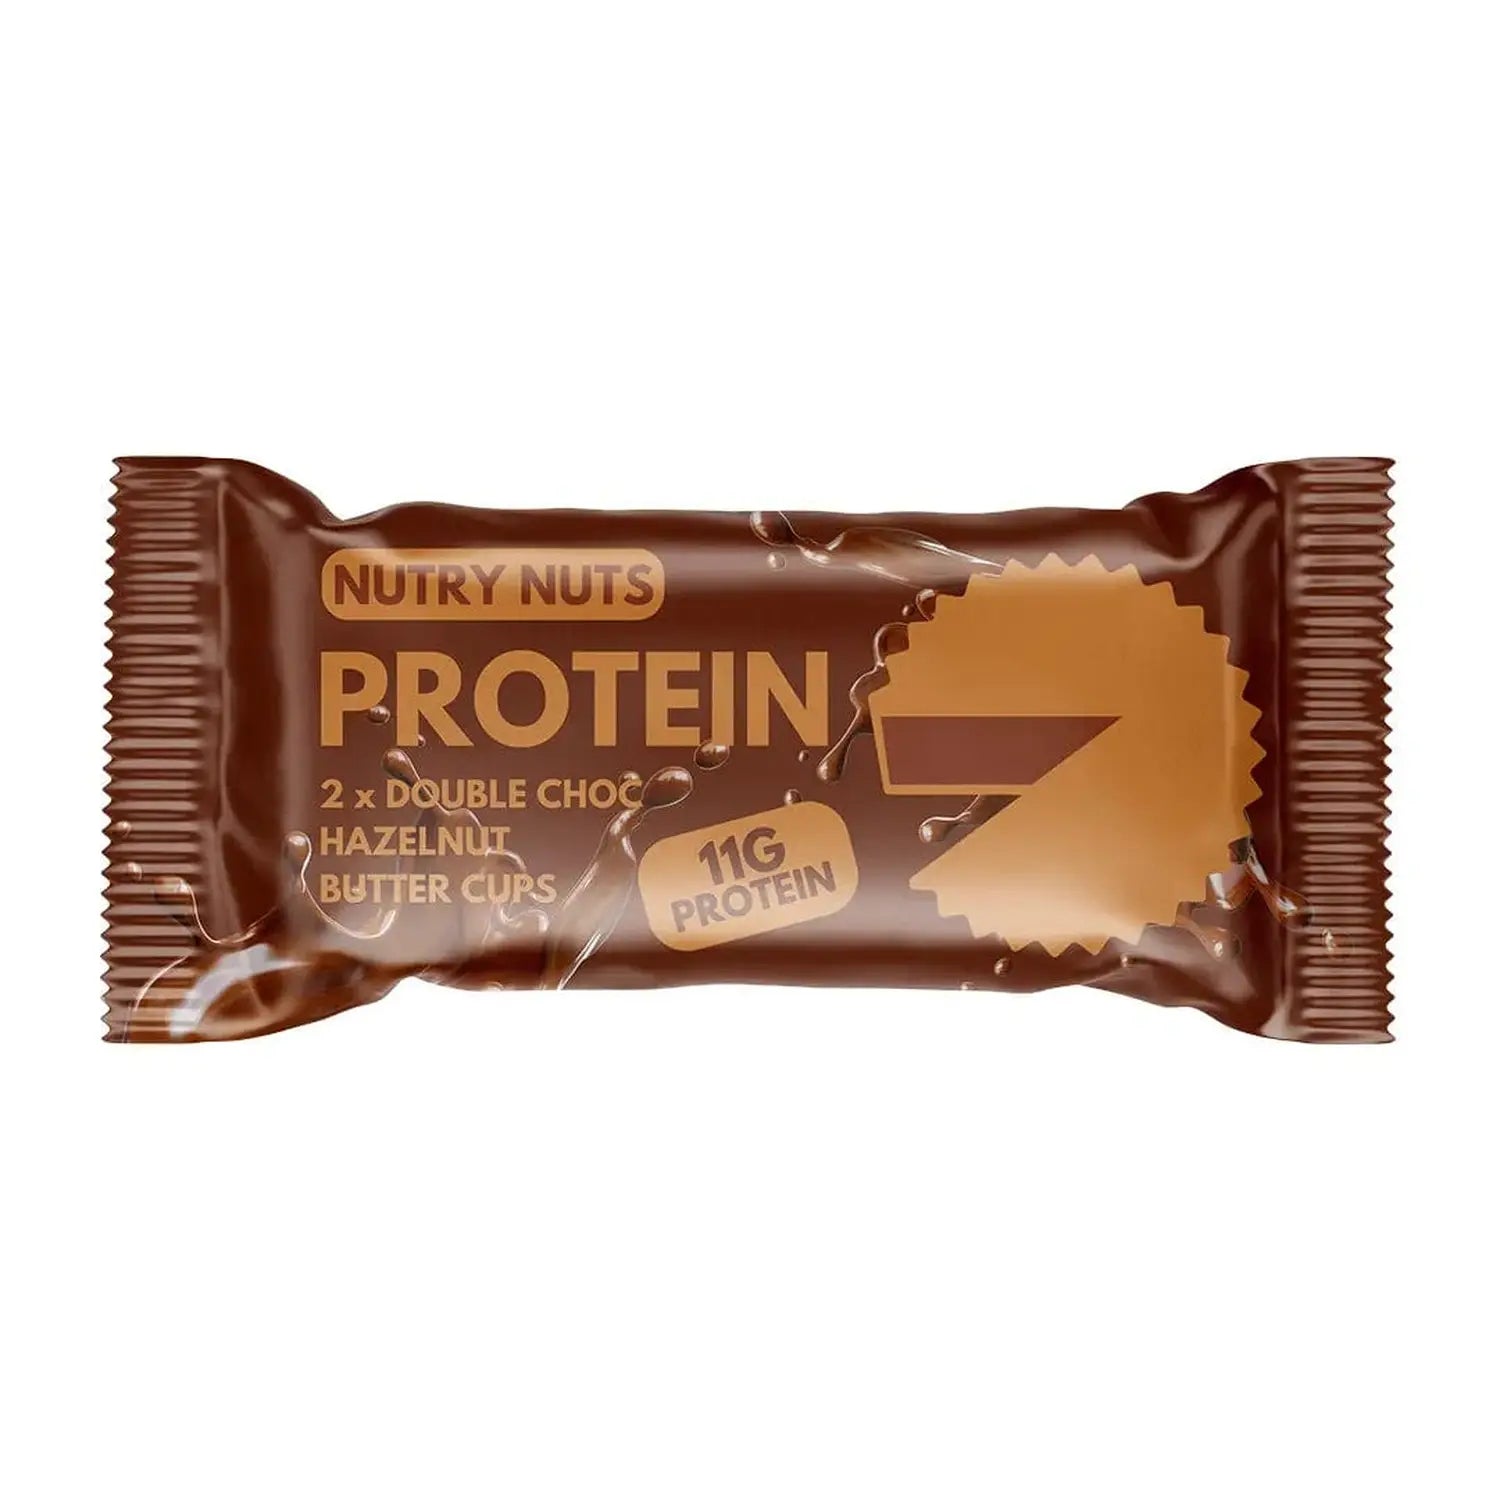 Nutry Nuts Nutry Nuts - Protein Peanut Butter Cups kaufen bei HighPowered.ch